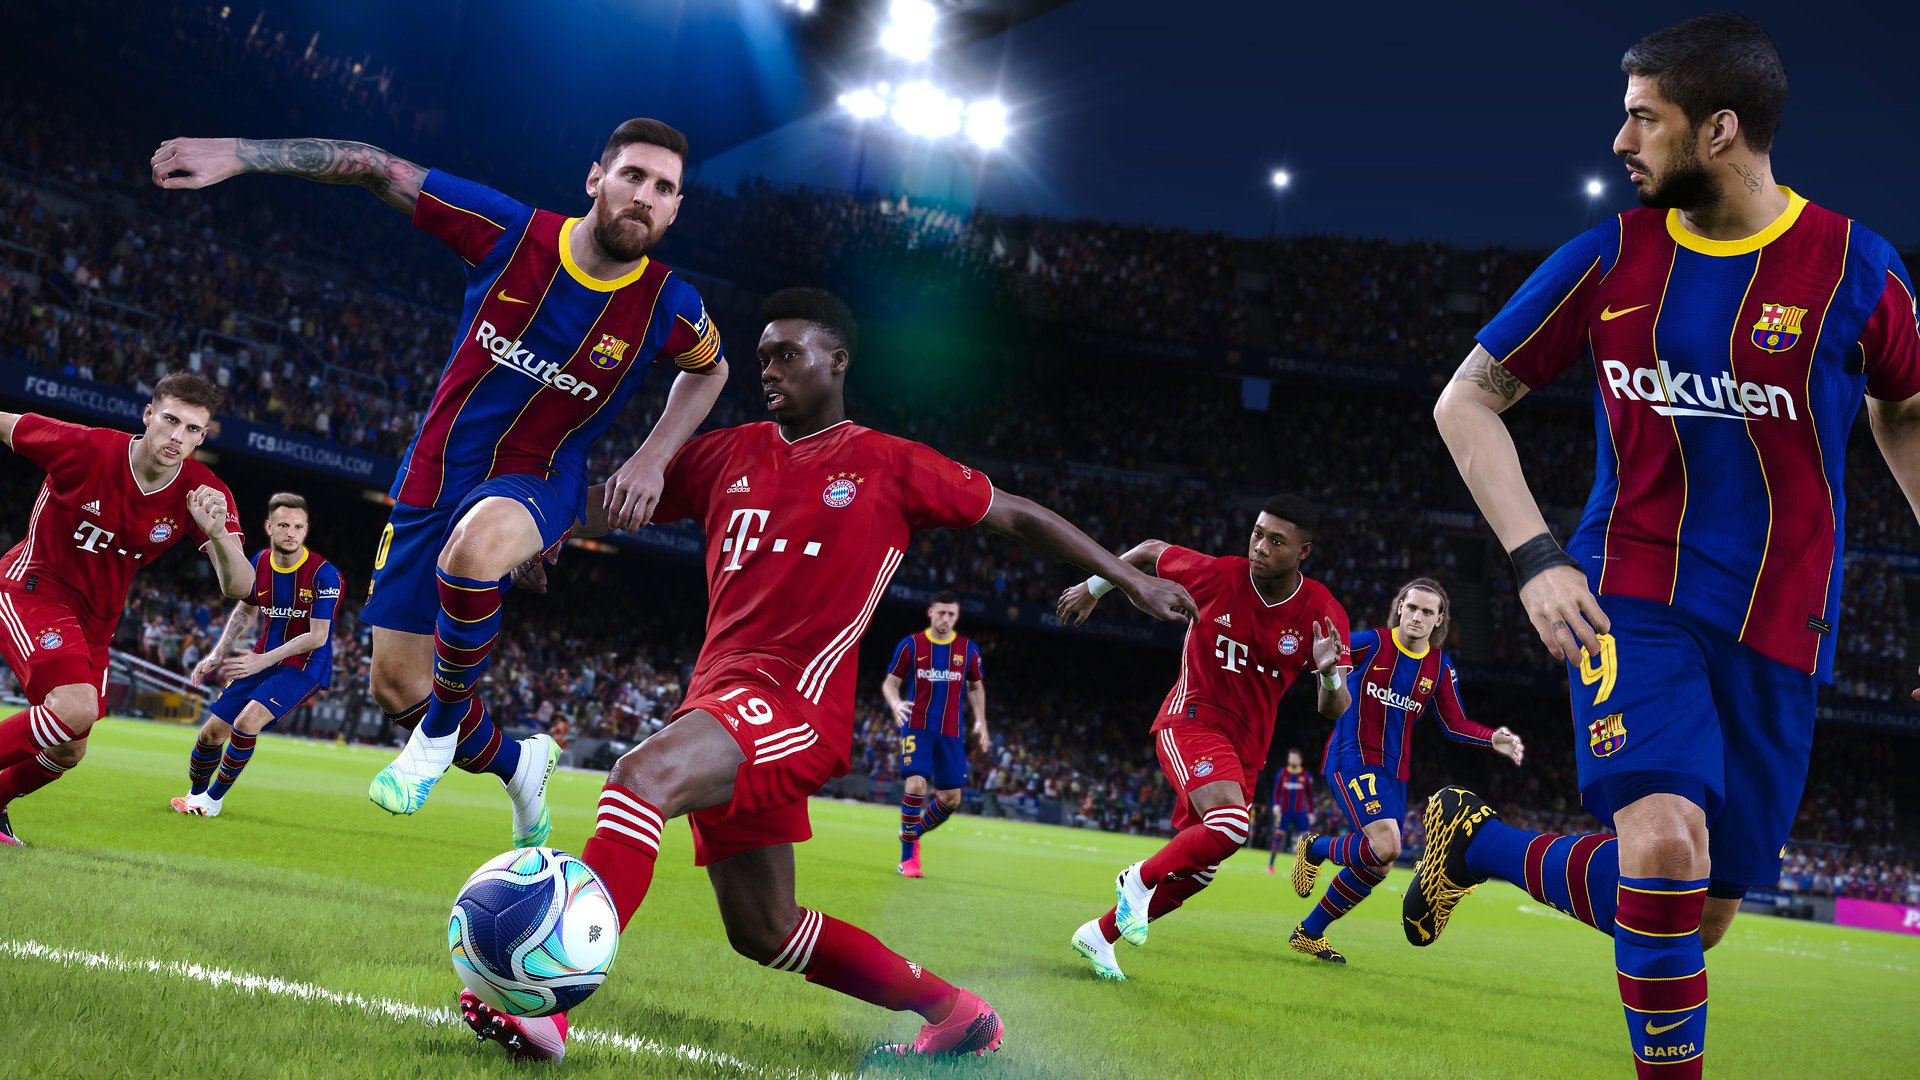 When is the release date for eFootball PES 2021 Mobile?